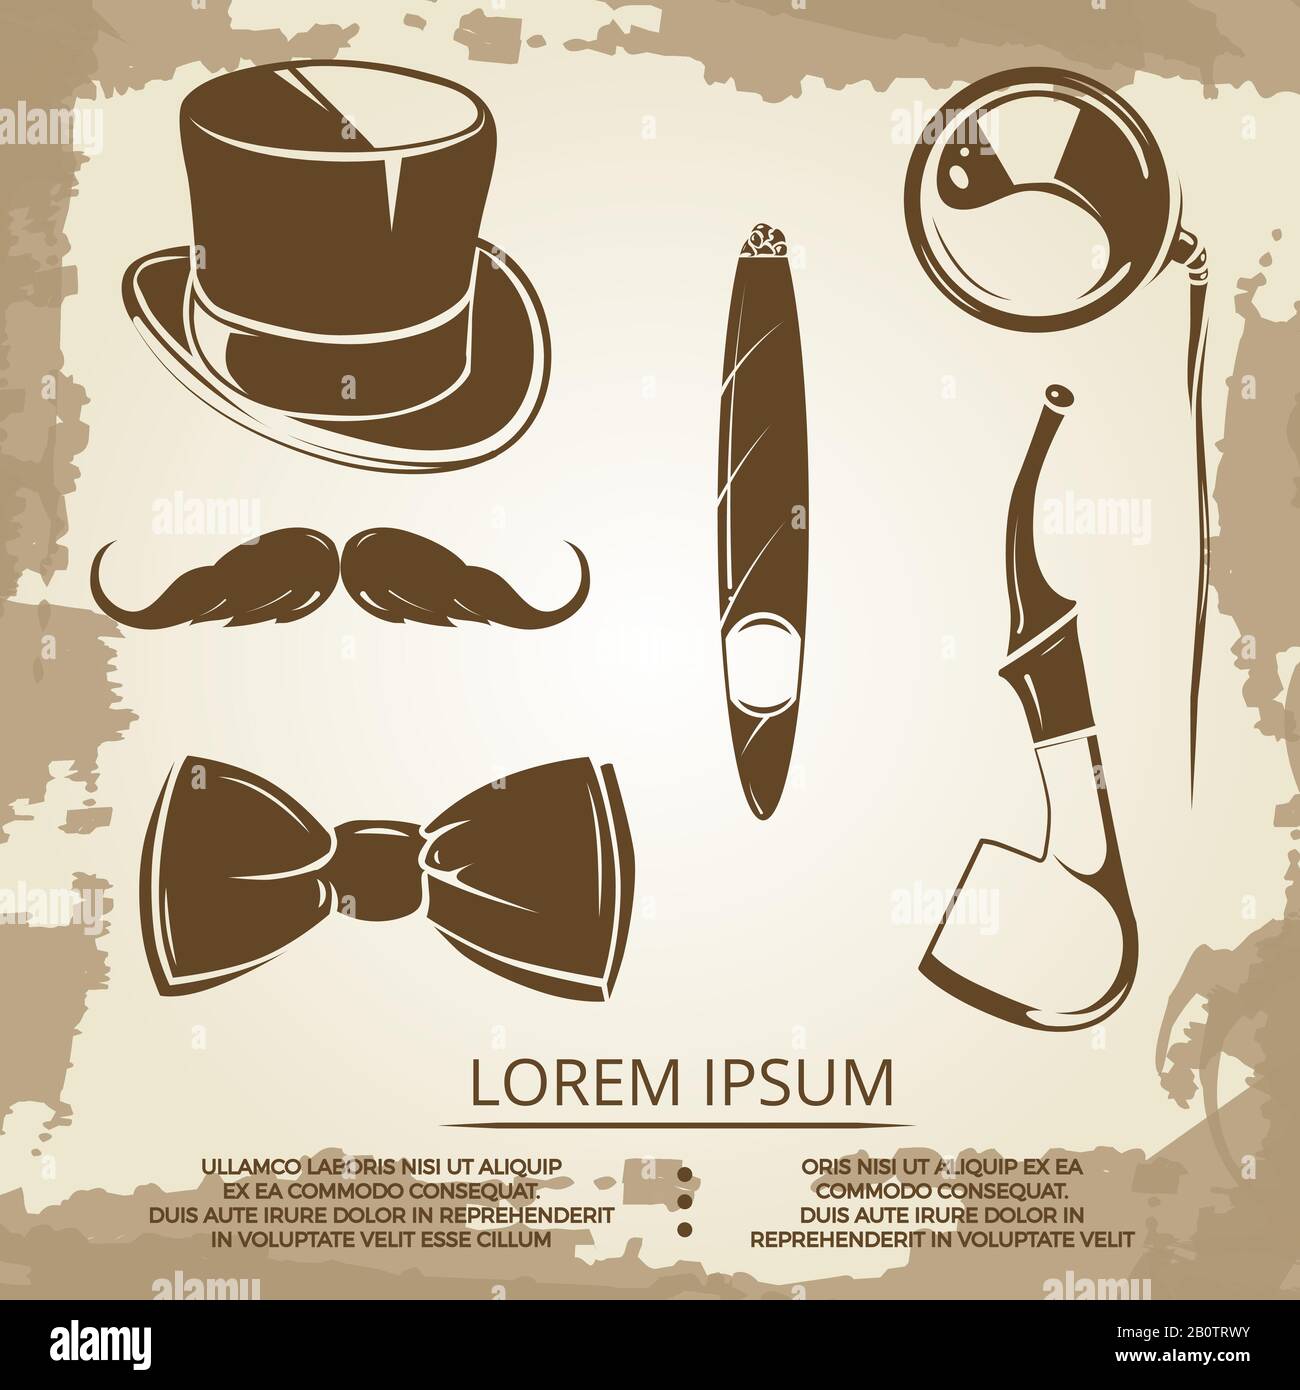 Getlemen style objects - cylinder, bow tie, tobacco. Vector vintage icons illustration Stock Vector